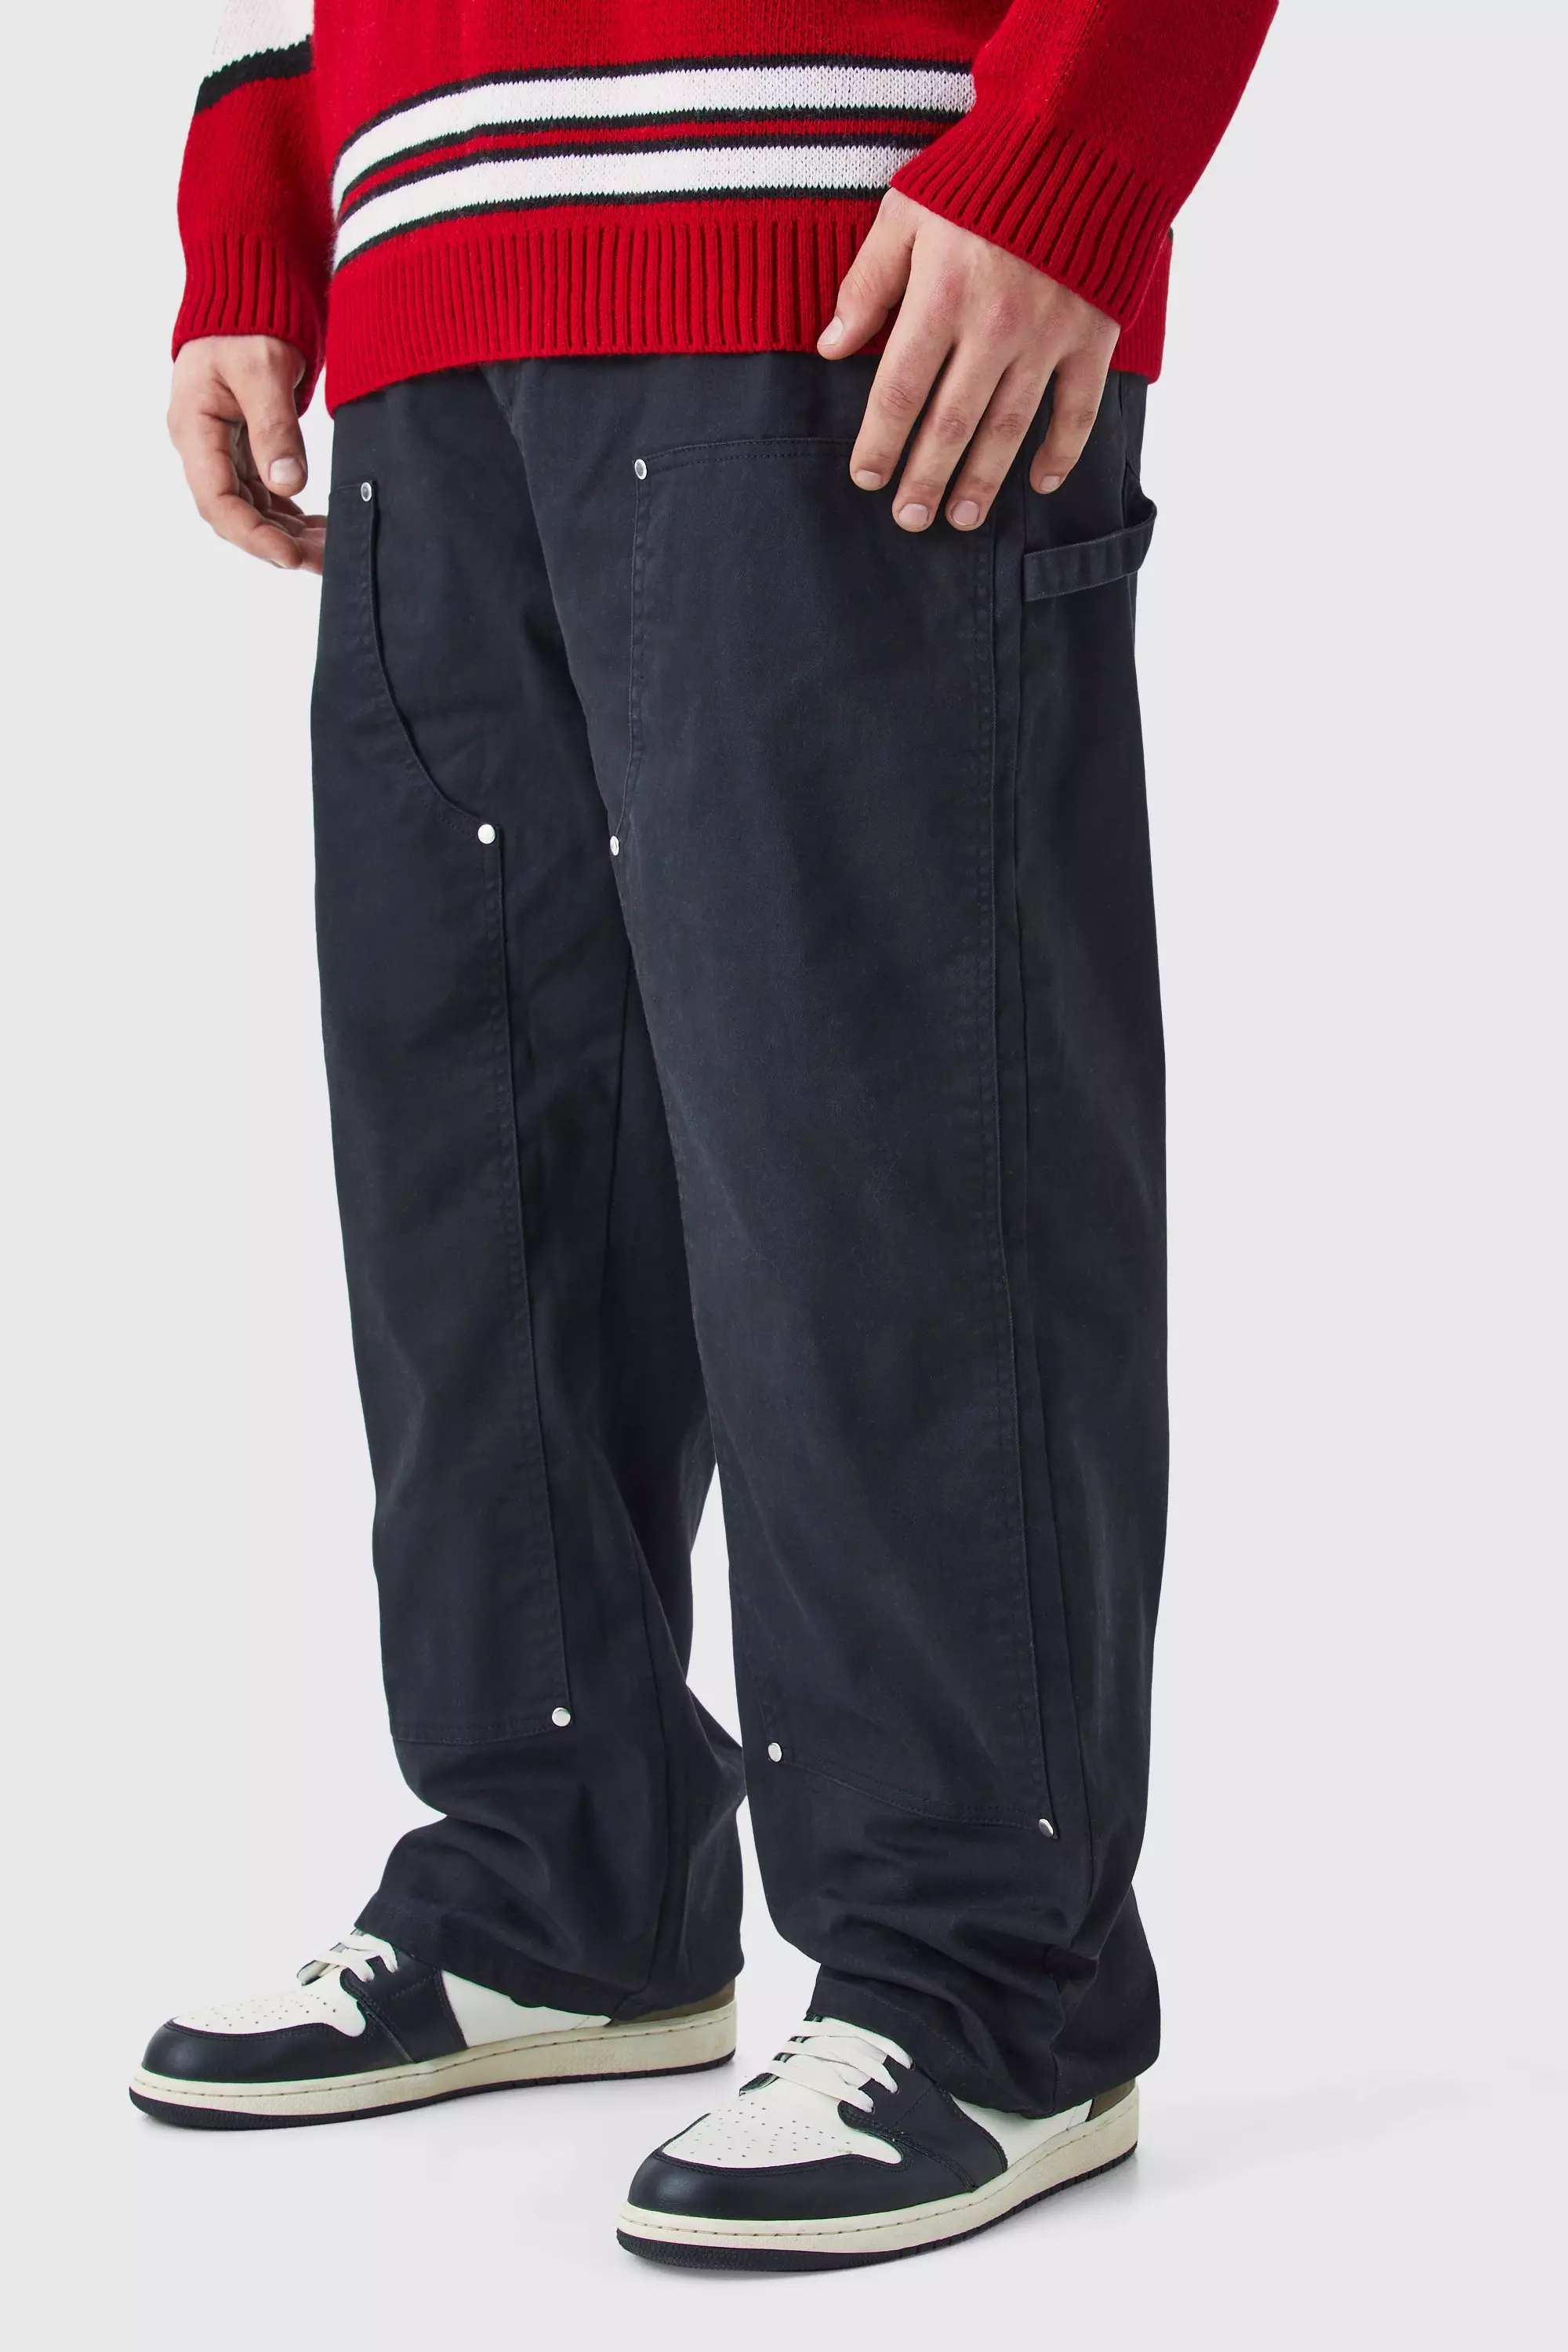 Plus Fixed Waist Relaxed Twill Carpenter Trouser Black